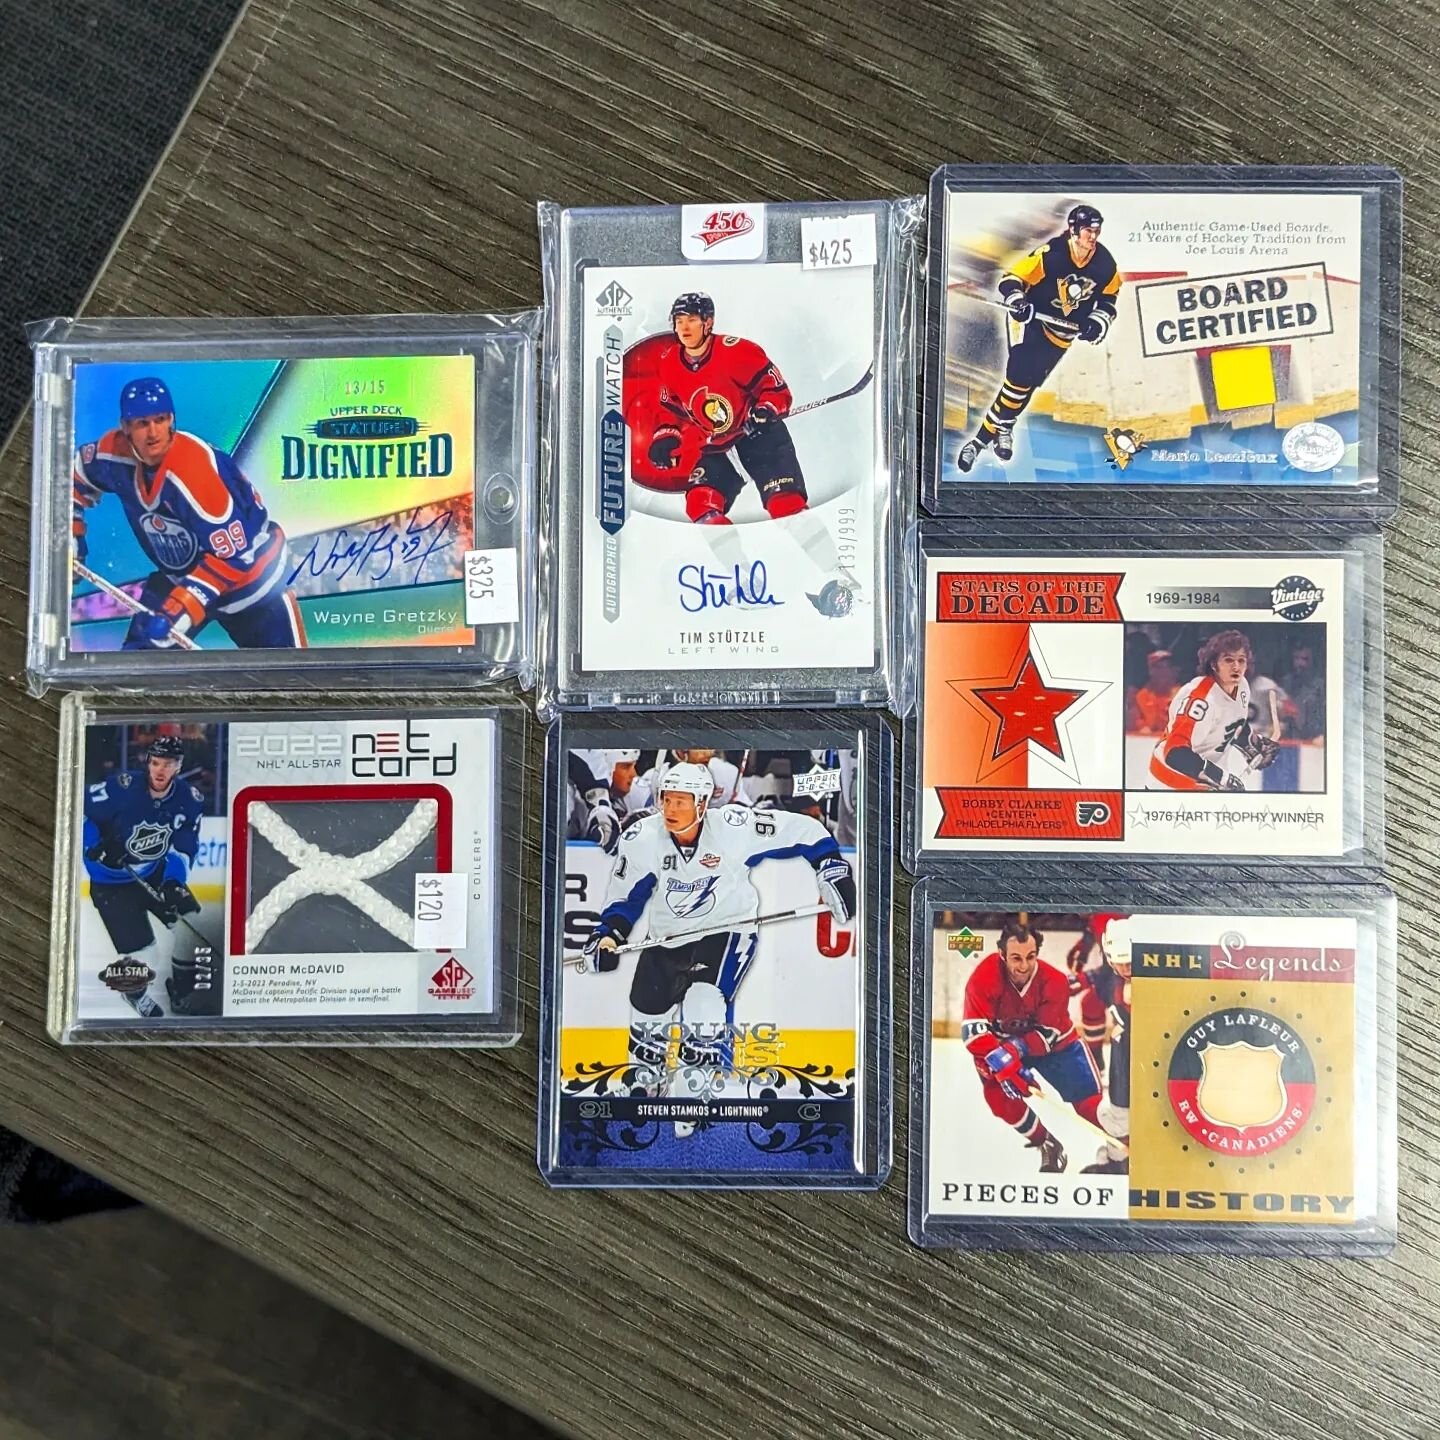 SWIPE FOR 🏒 ⚾ 🏈 🏀 ⚽🐐

PUTTING OUT NEW PICK UPS! 
ALL AVAILABLE IN STORE OR IN THE DMS! 

ALWAYS BUYING, SELLING, &amp; TRADING!